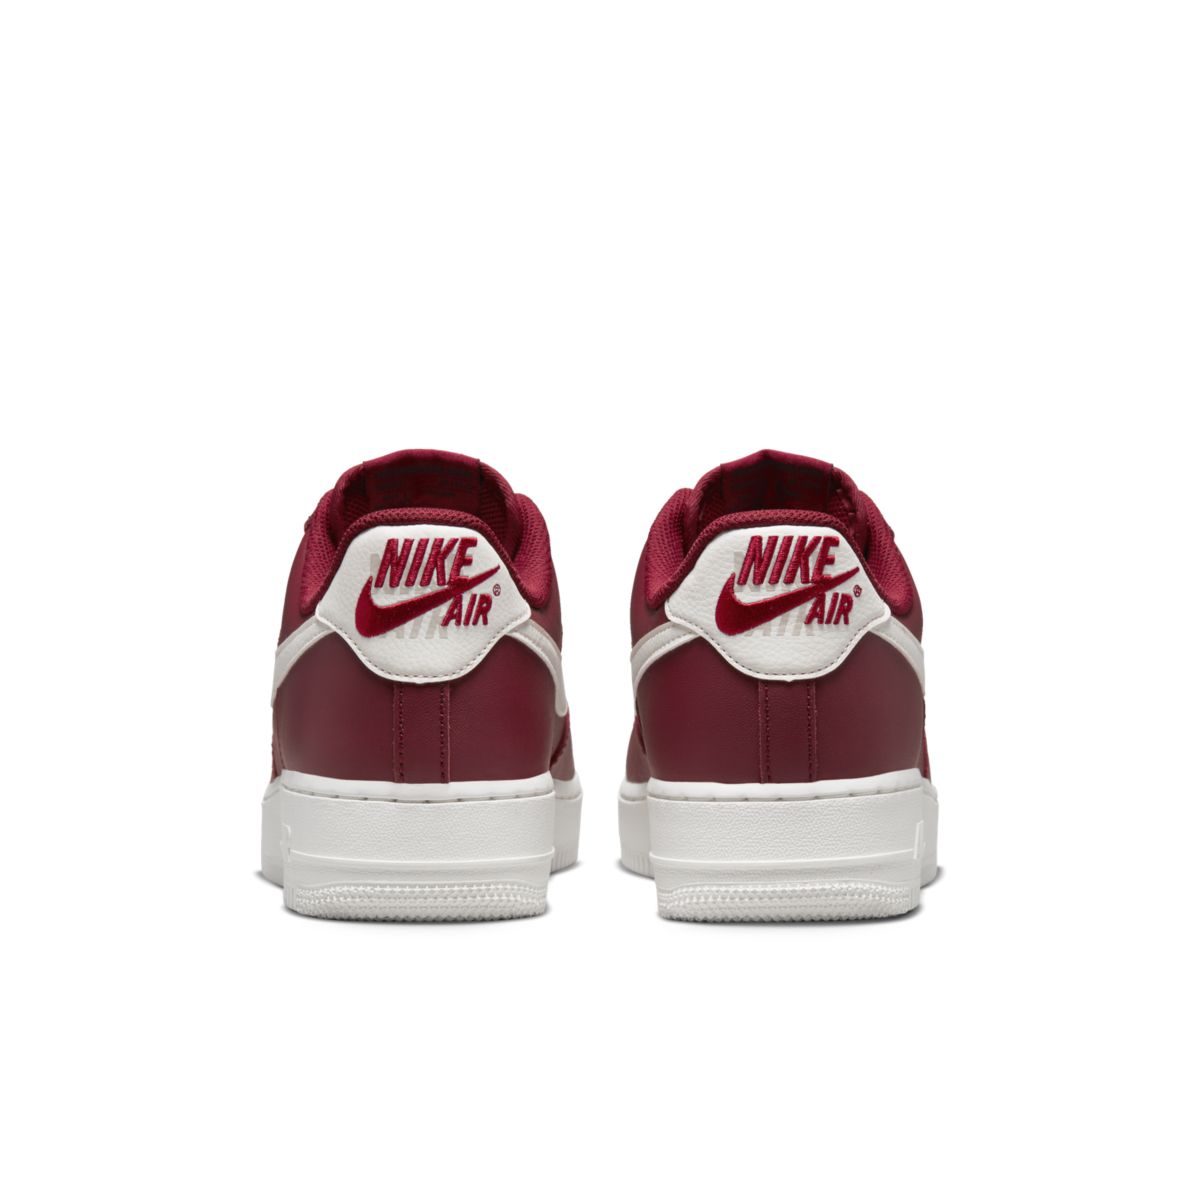 Nike Air Force 1 Low Multi Swoosh Team Red DQ7664-600 6